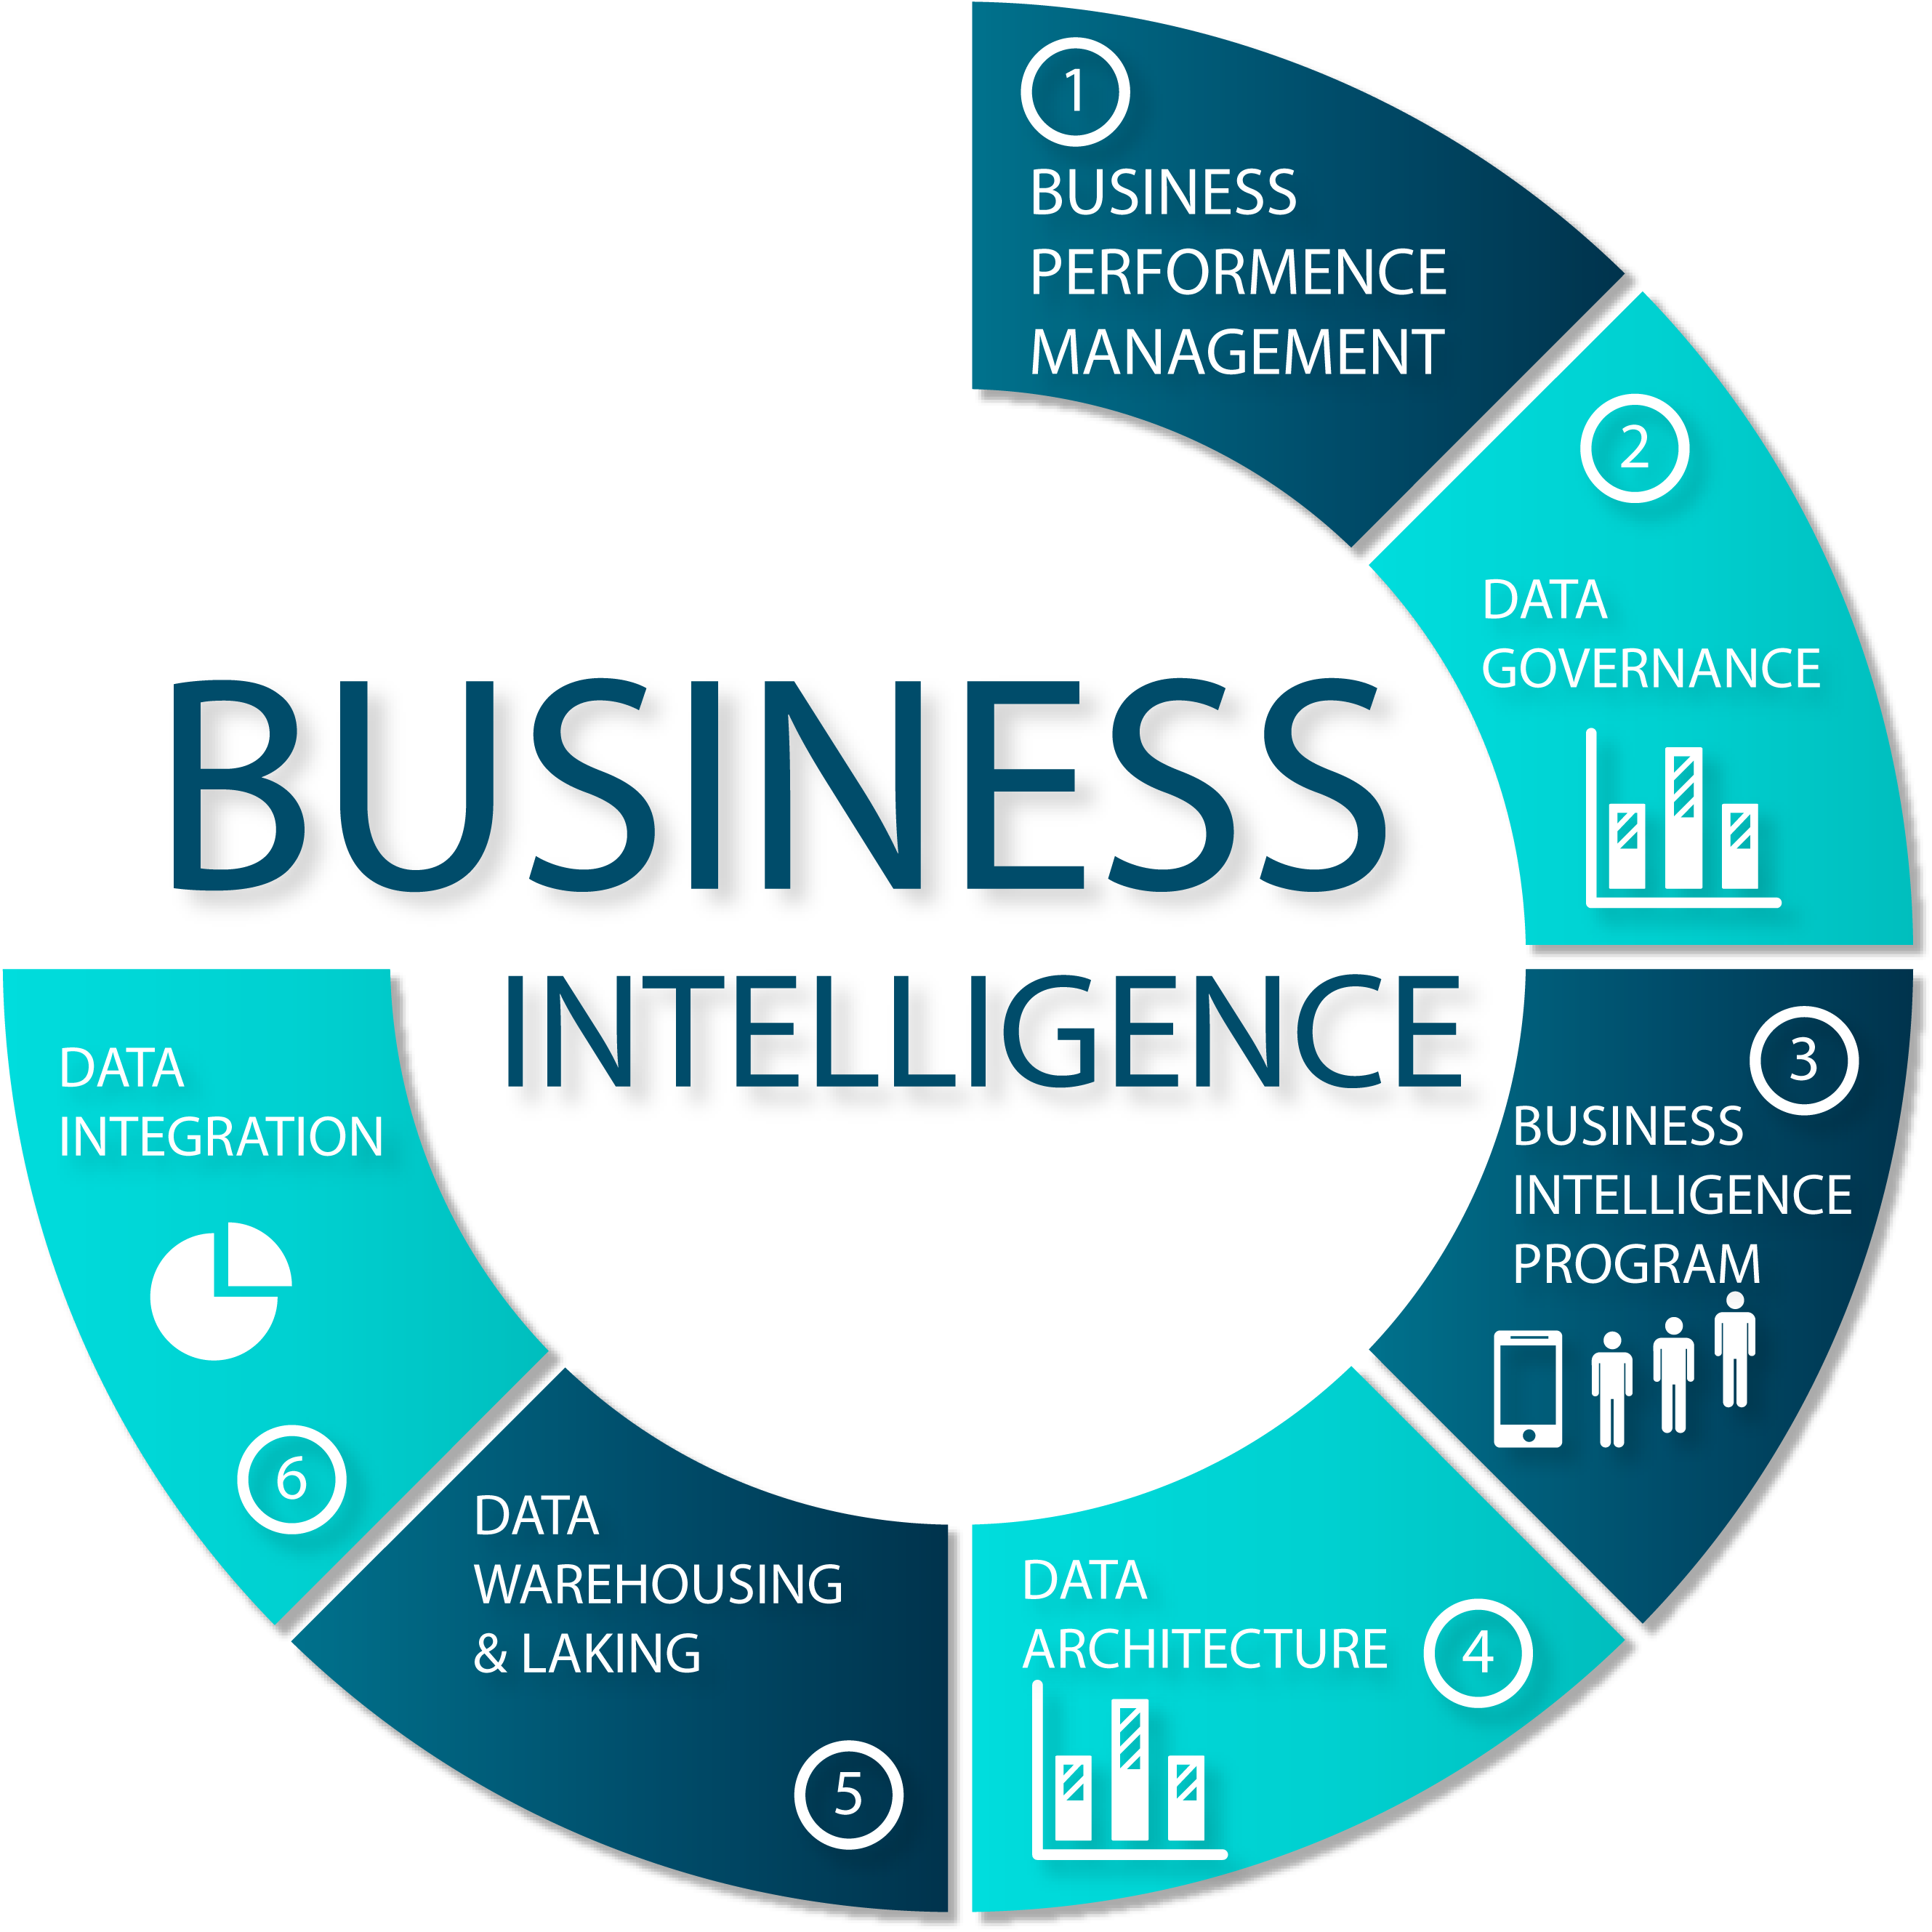 How does Business Intelligence Platform support self-service analytics?